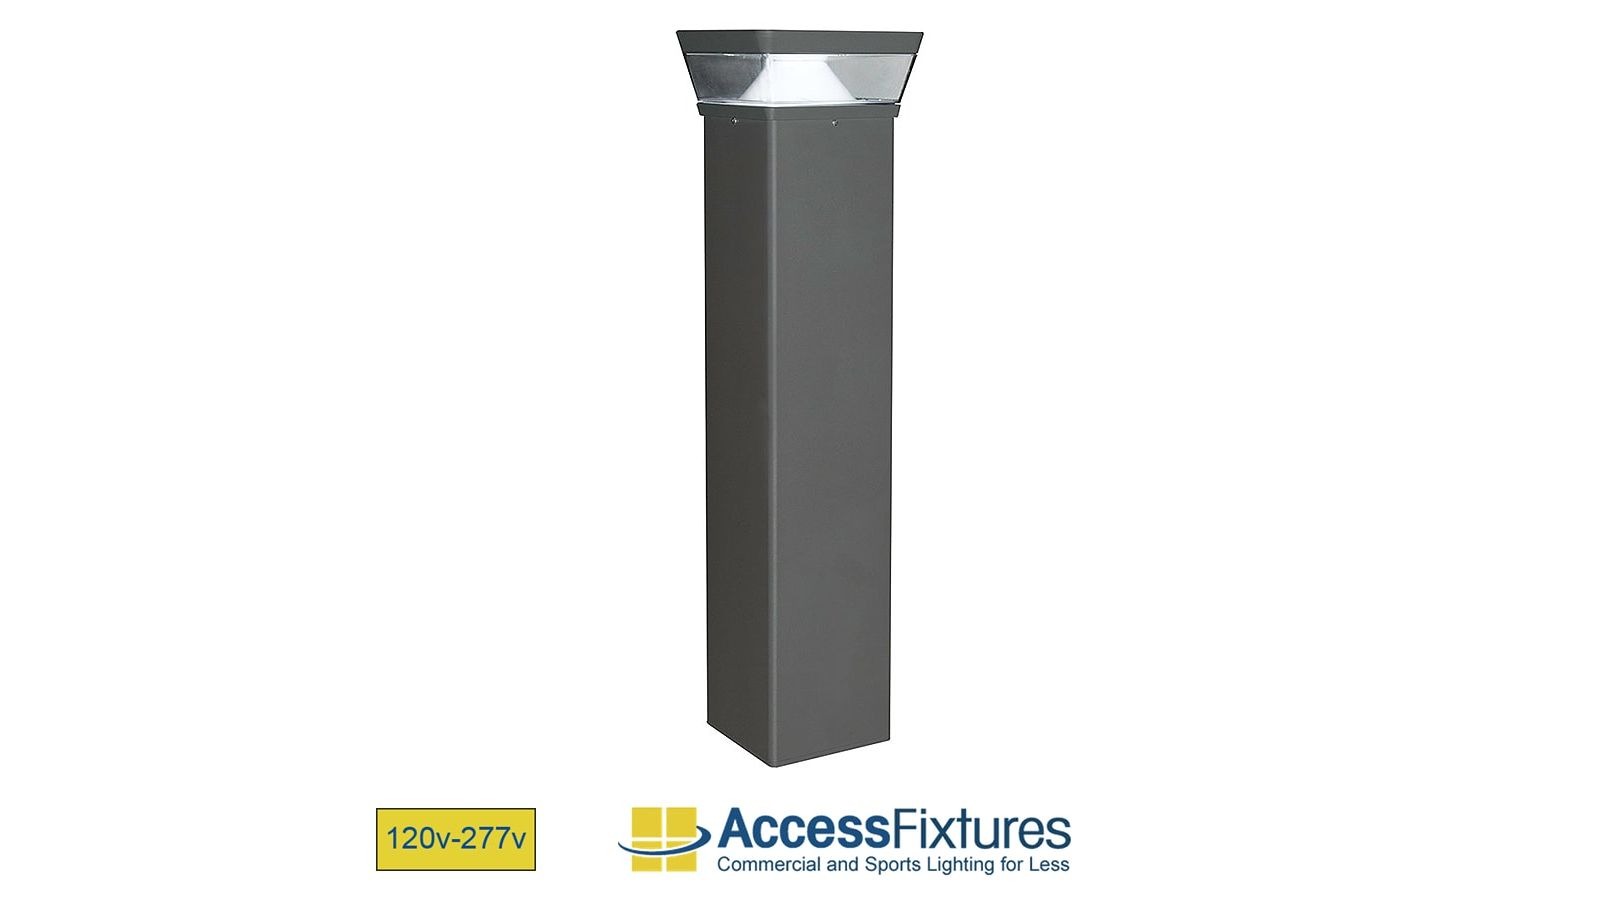 OPPE 26w Square LED Bollard Light with Reflector – Dimmable LED Bollard Light – IP67, CSA Rated, Aluminum Housing